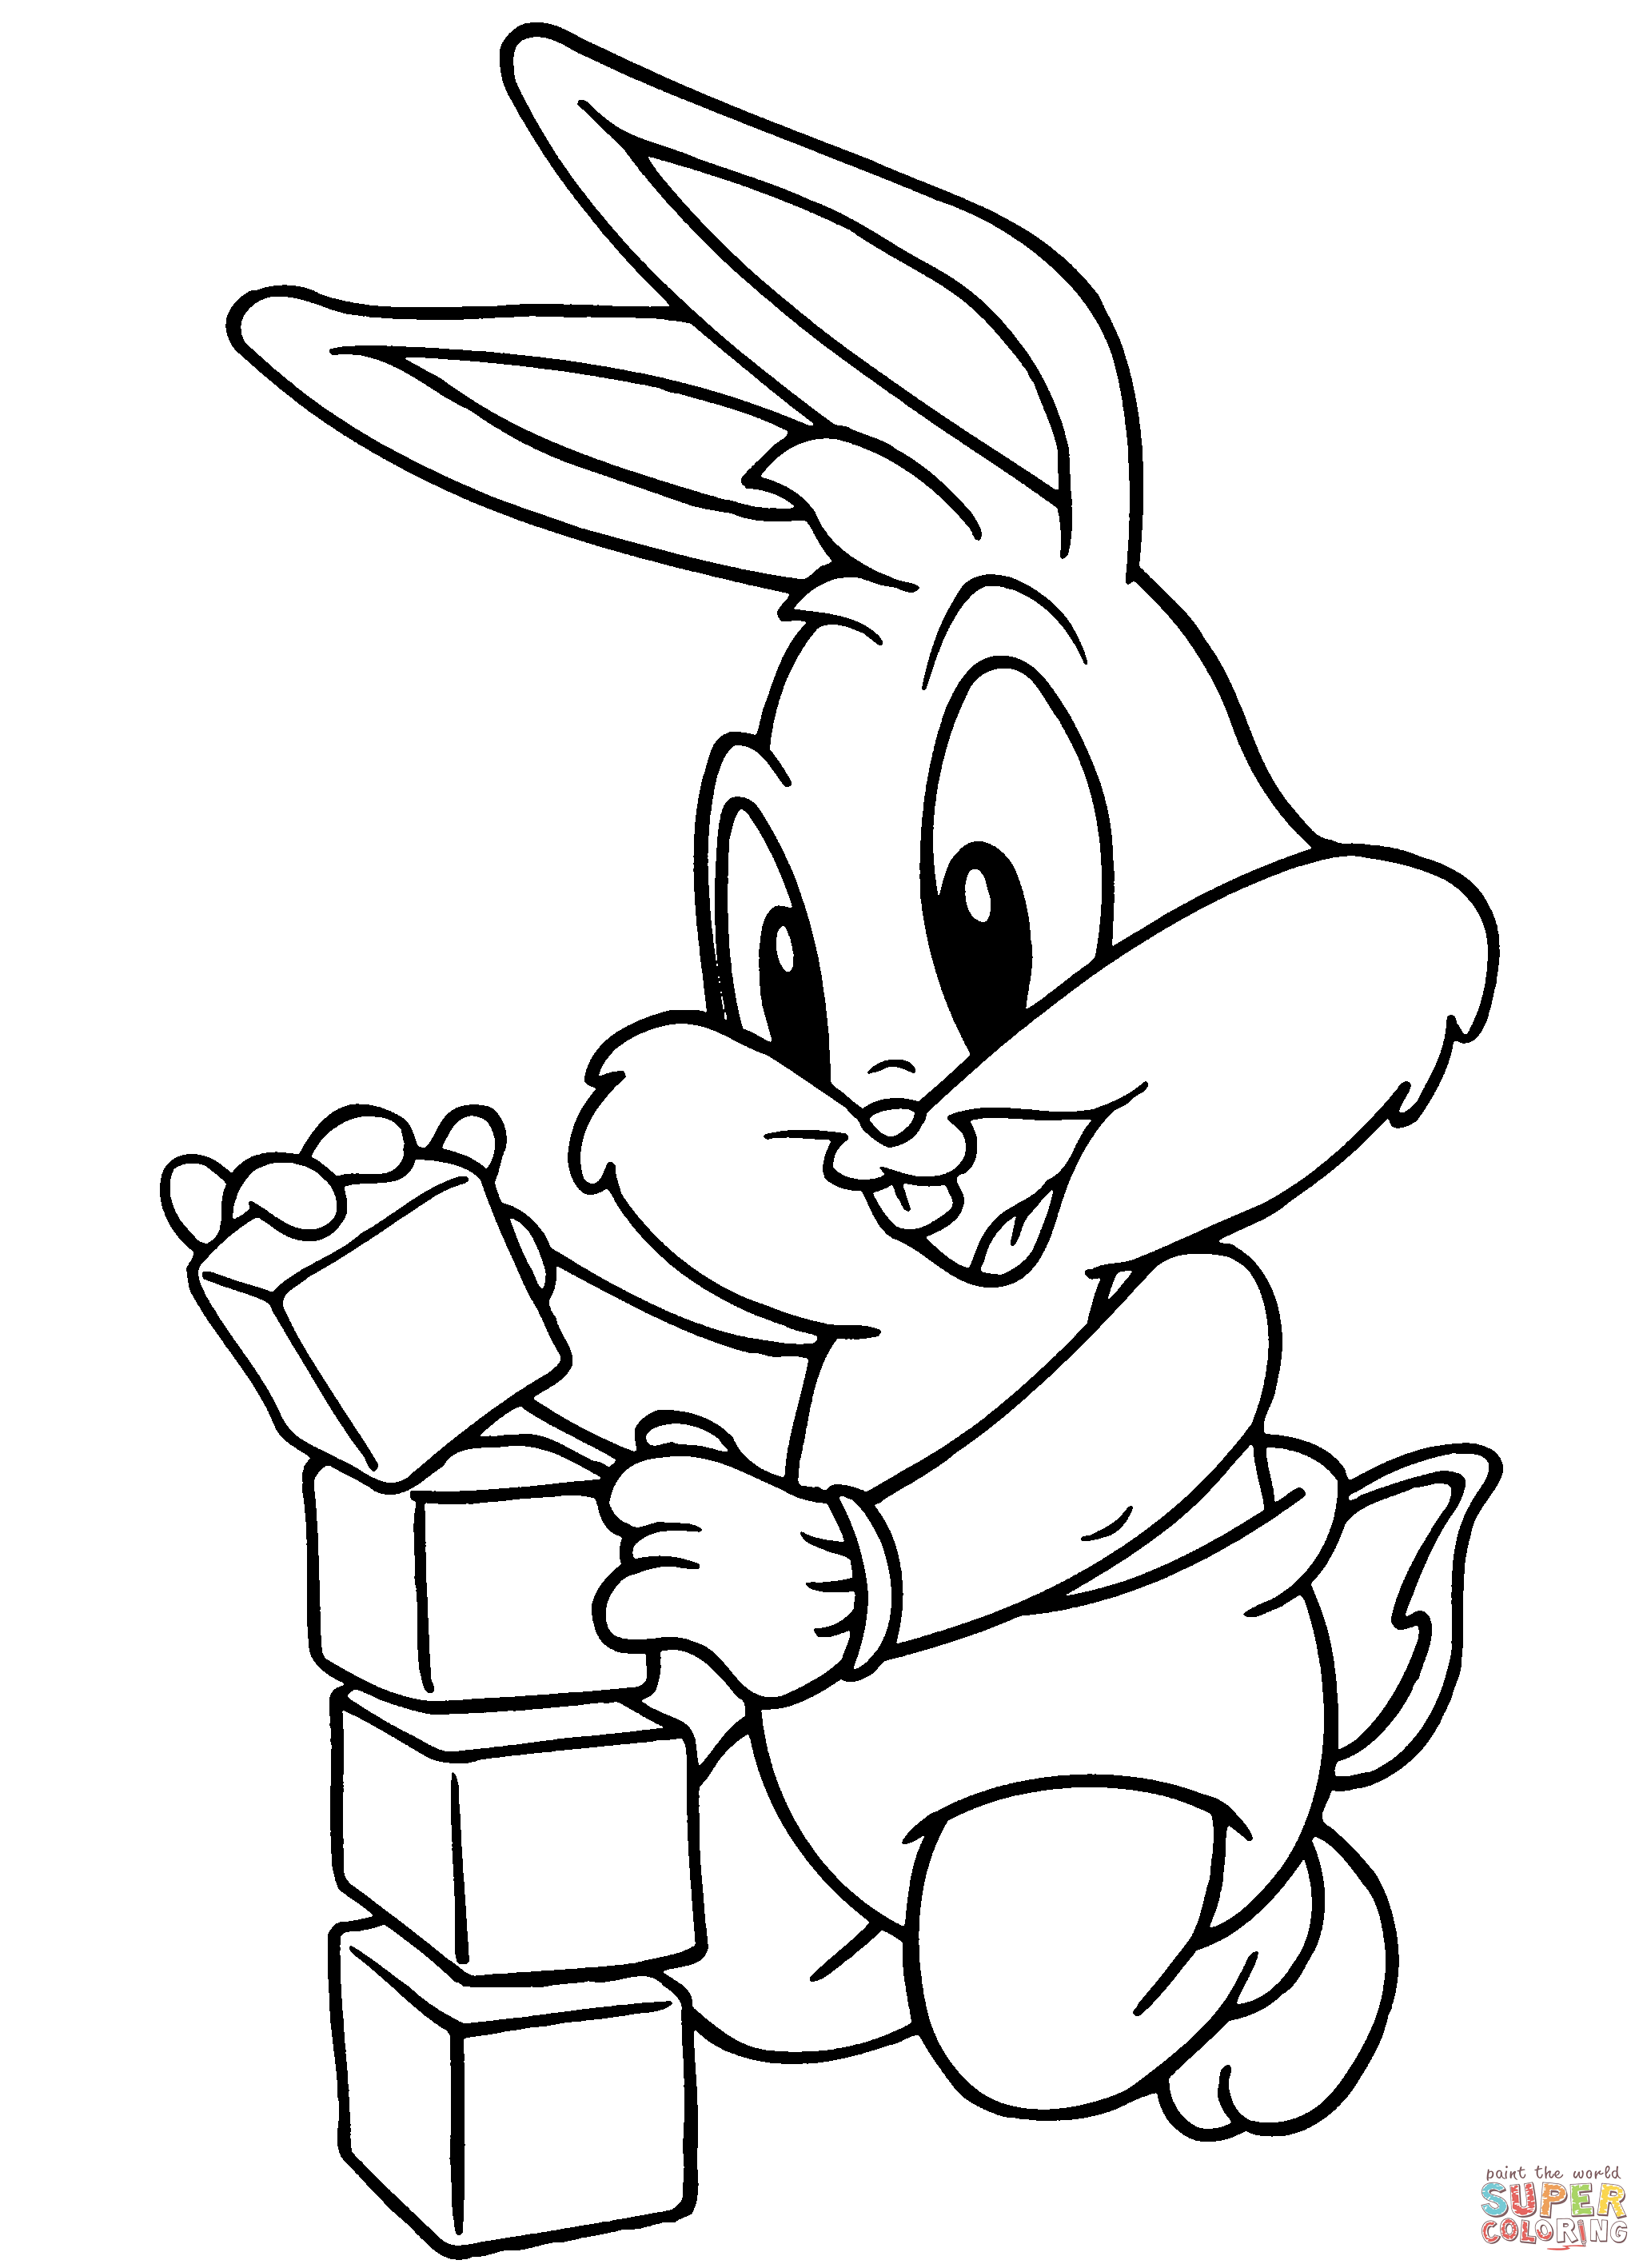 Baby Looney Tunes coloring pages | Free Coloring Pages